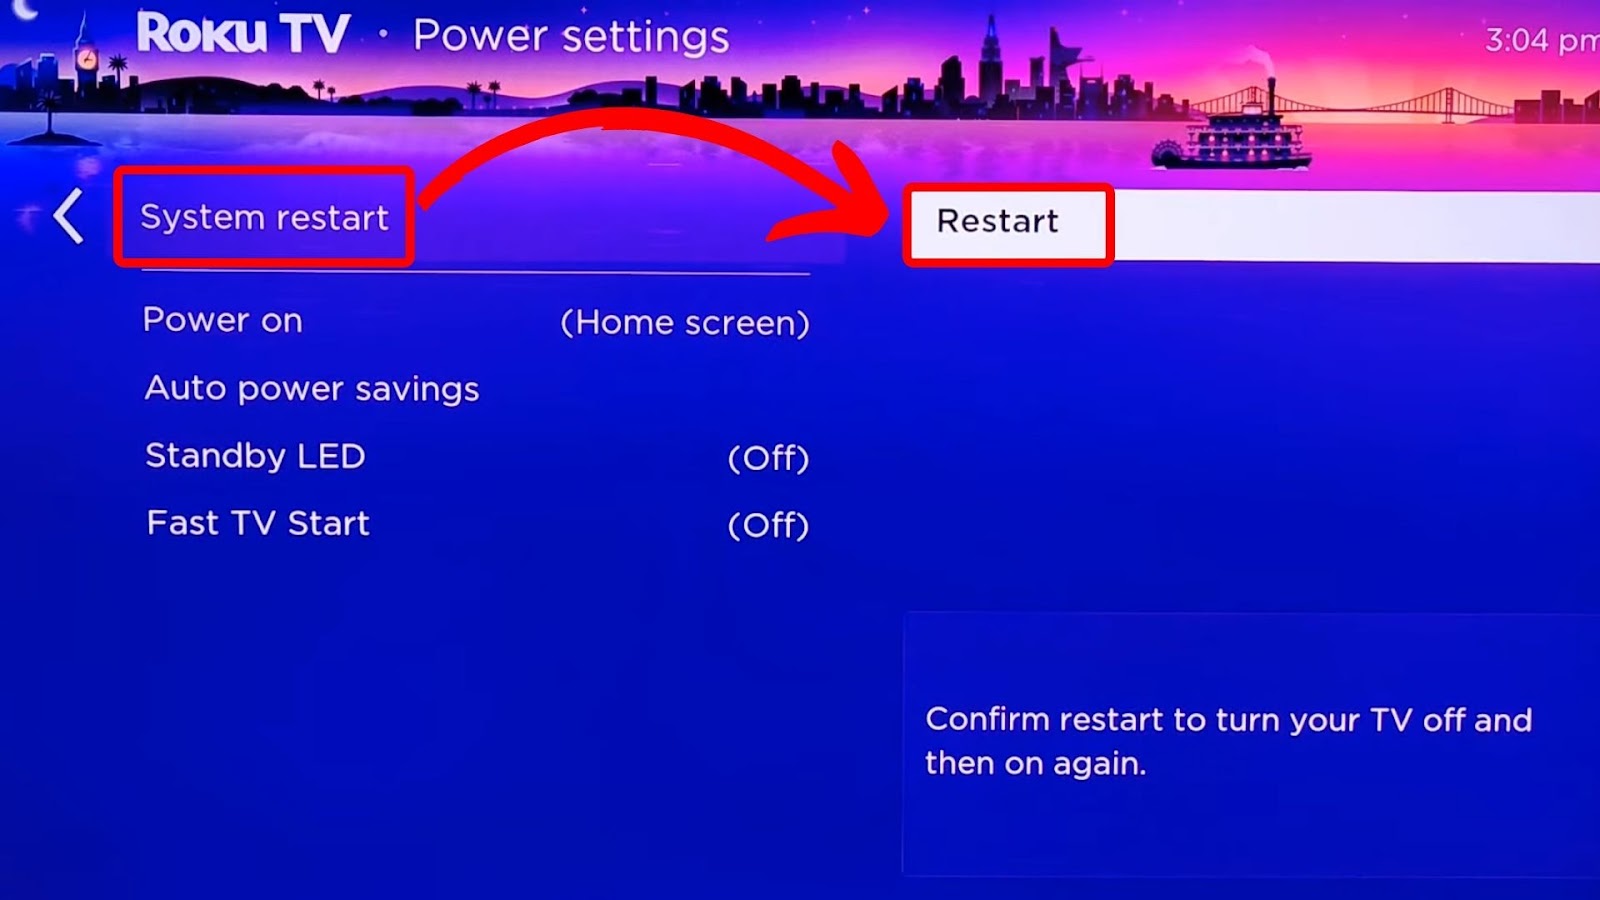 Restarting Philips Roku TV to Fix Sound Issues